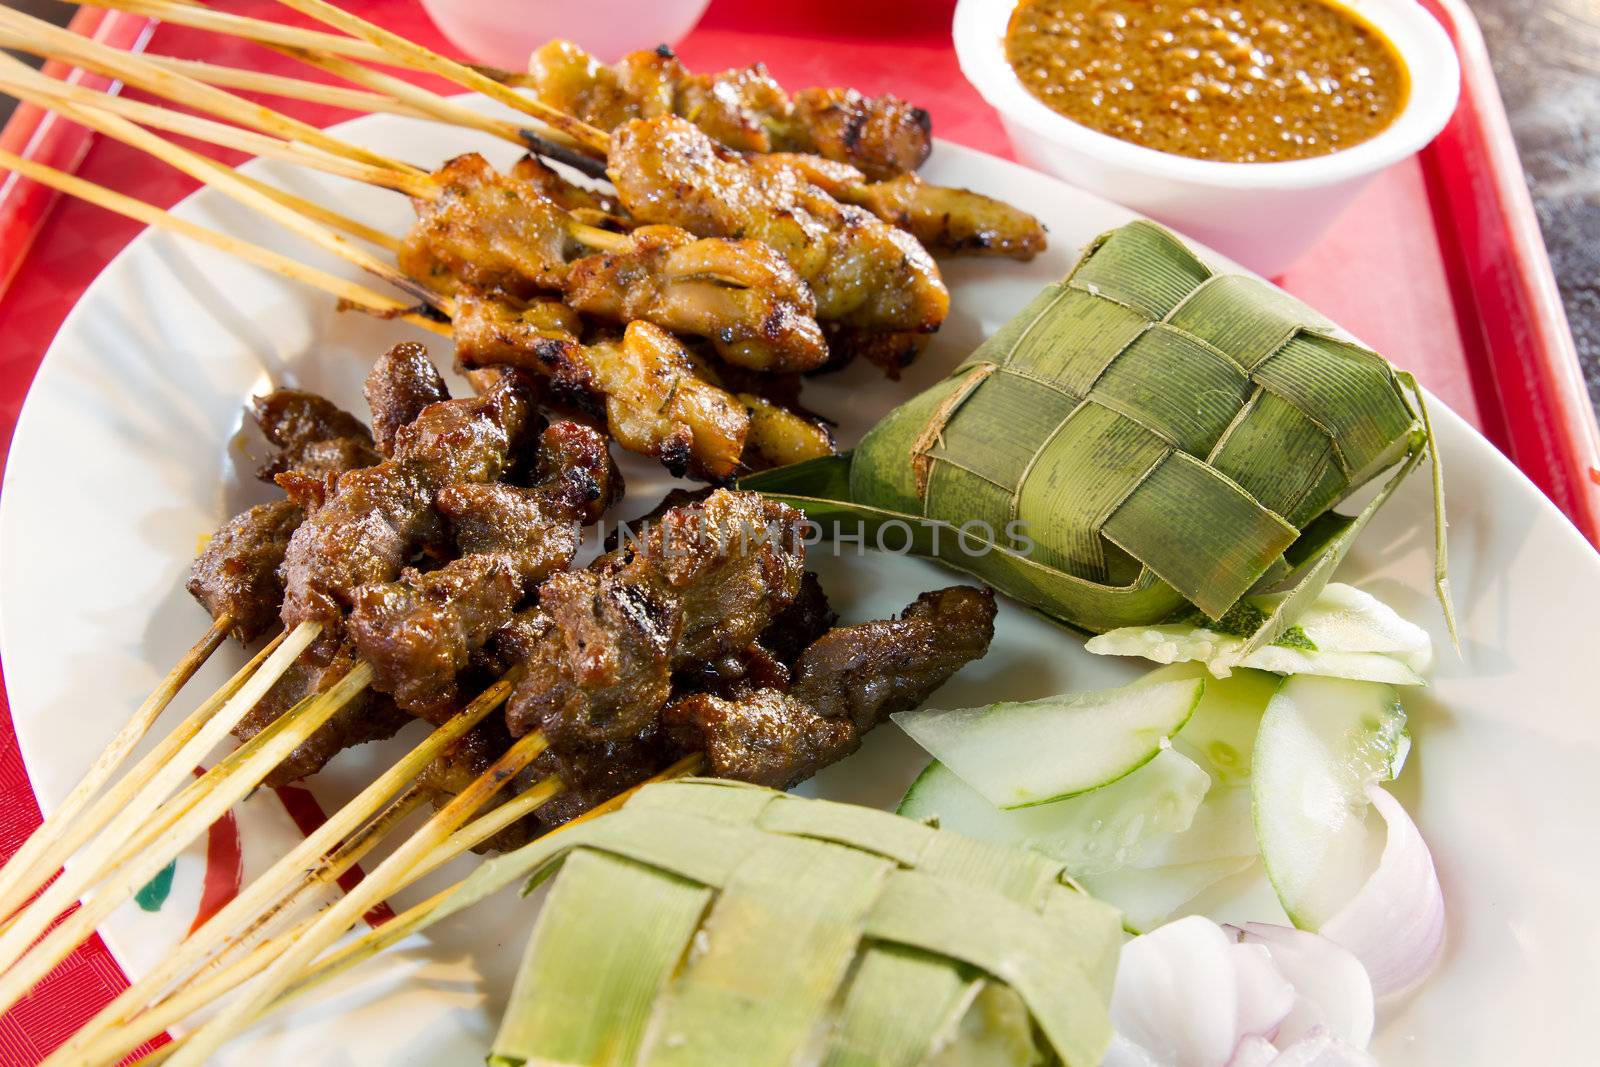 Chicken and Lamb Satay Skewers with Ketupat Rice by jpldesigns